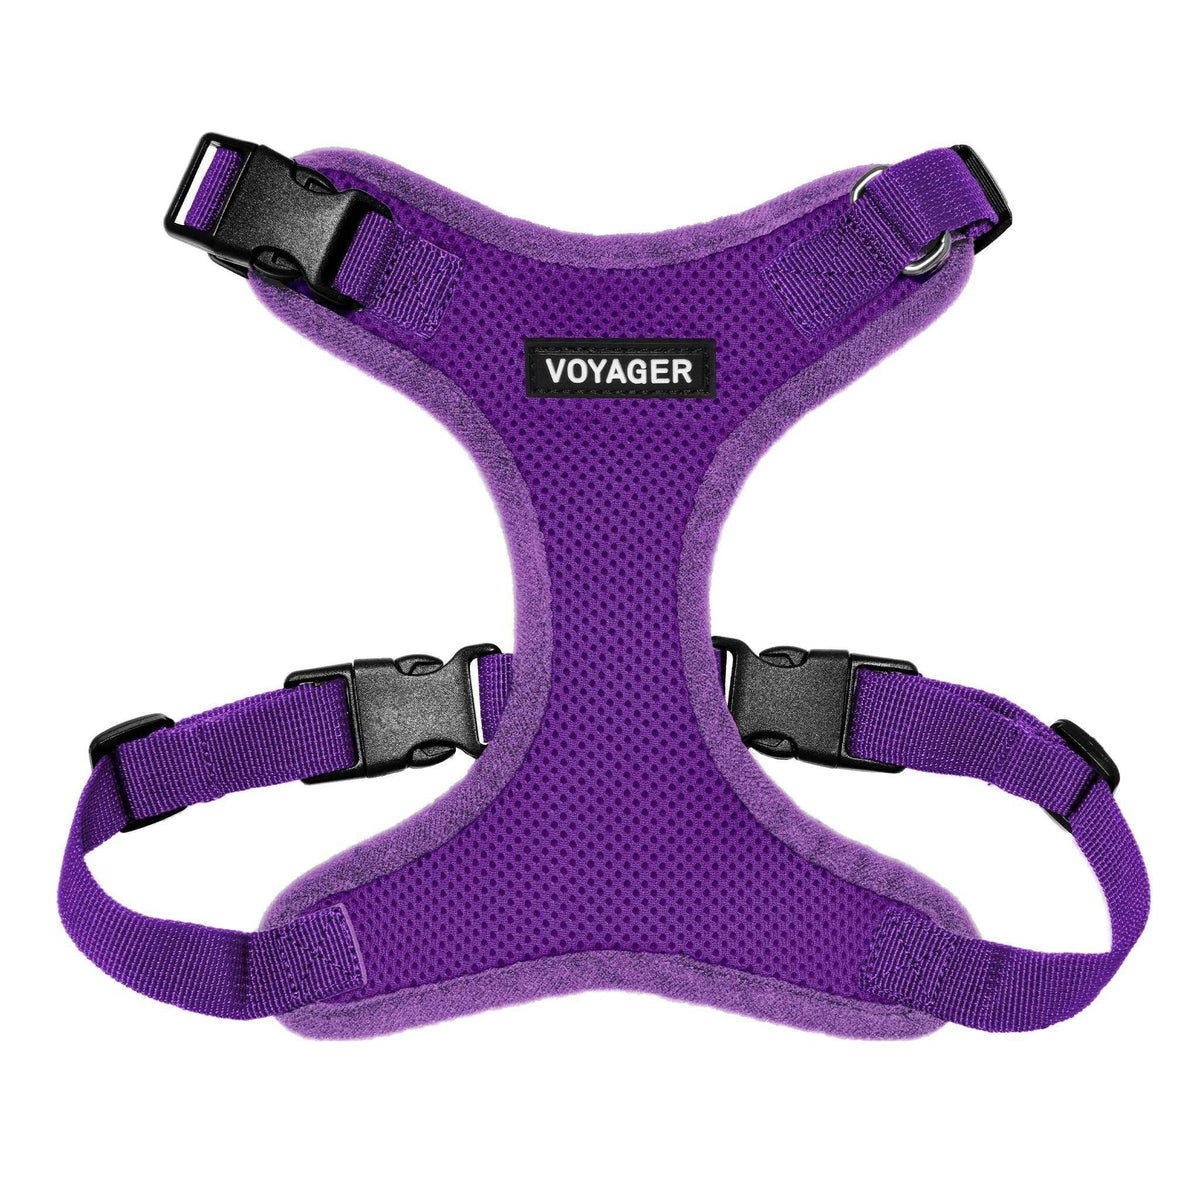 VOYAGER Step-In Lock Dog Harness in Purple with Matching Trim and Webbing - Front